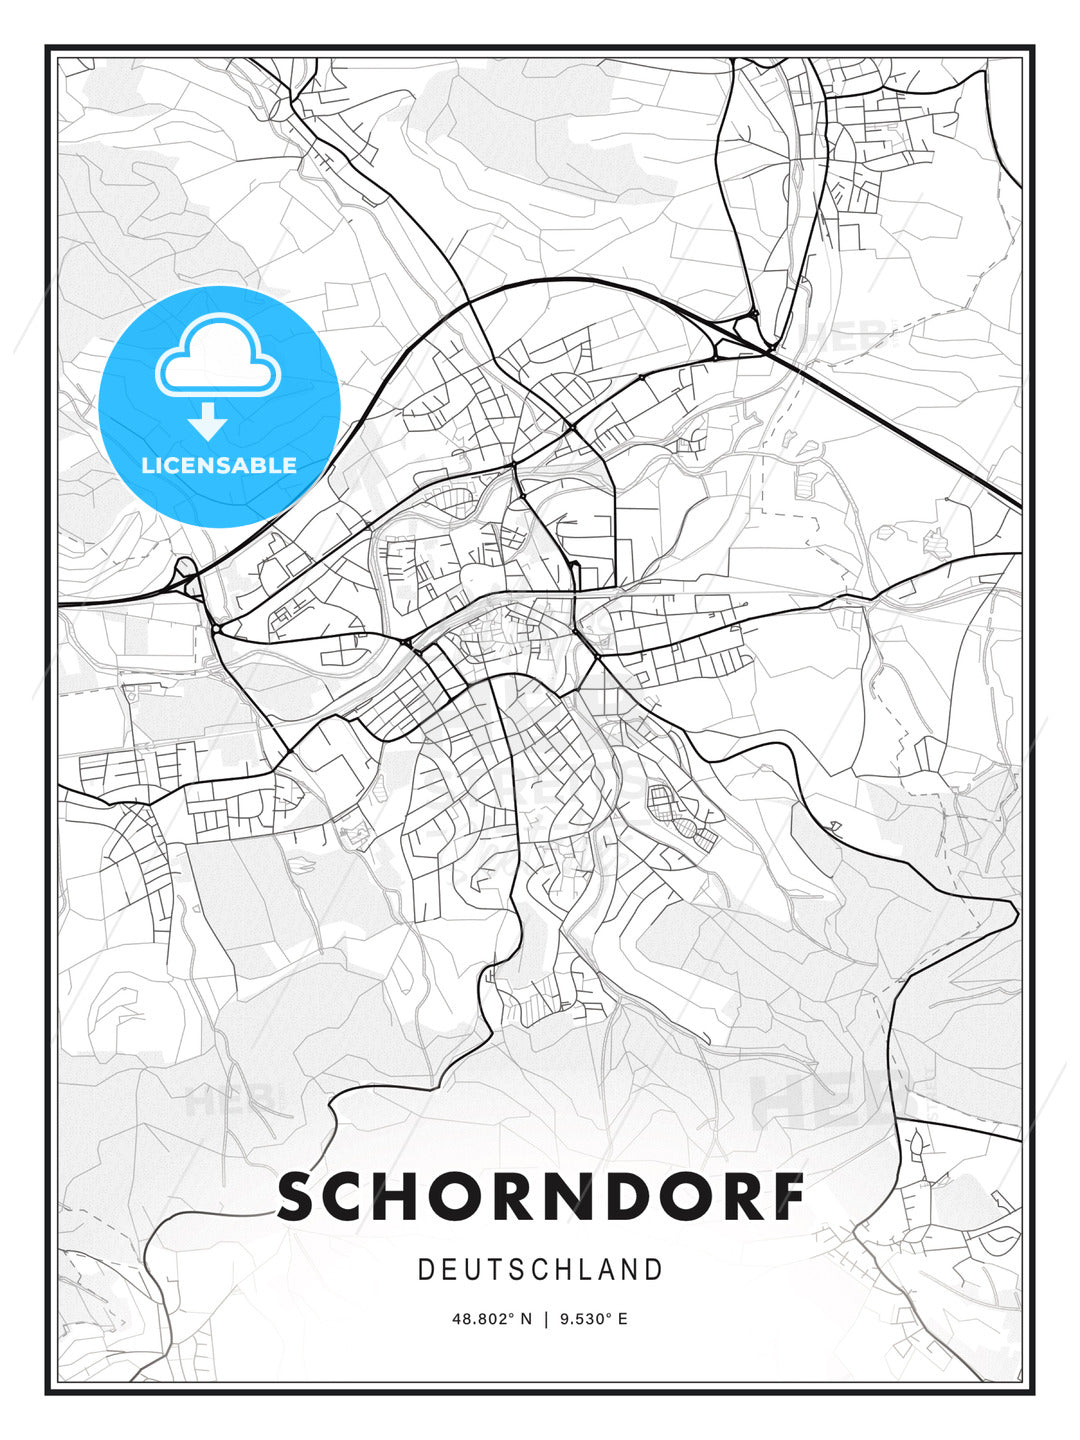 Schorndorf, Germany, Modern Print Template in Various Formats - HEBSTREITS Sketches